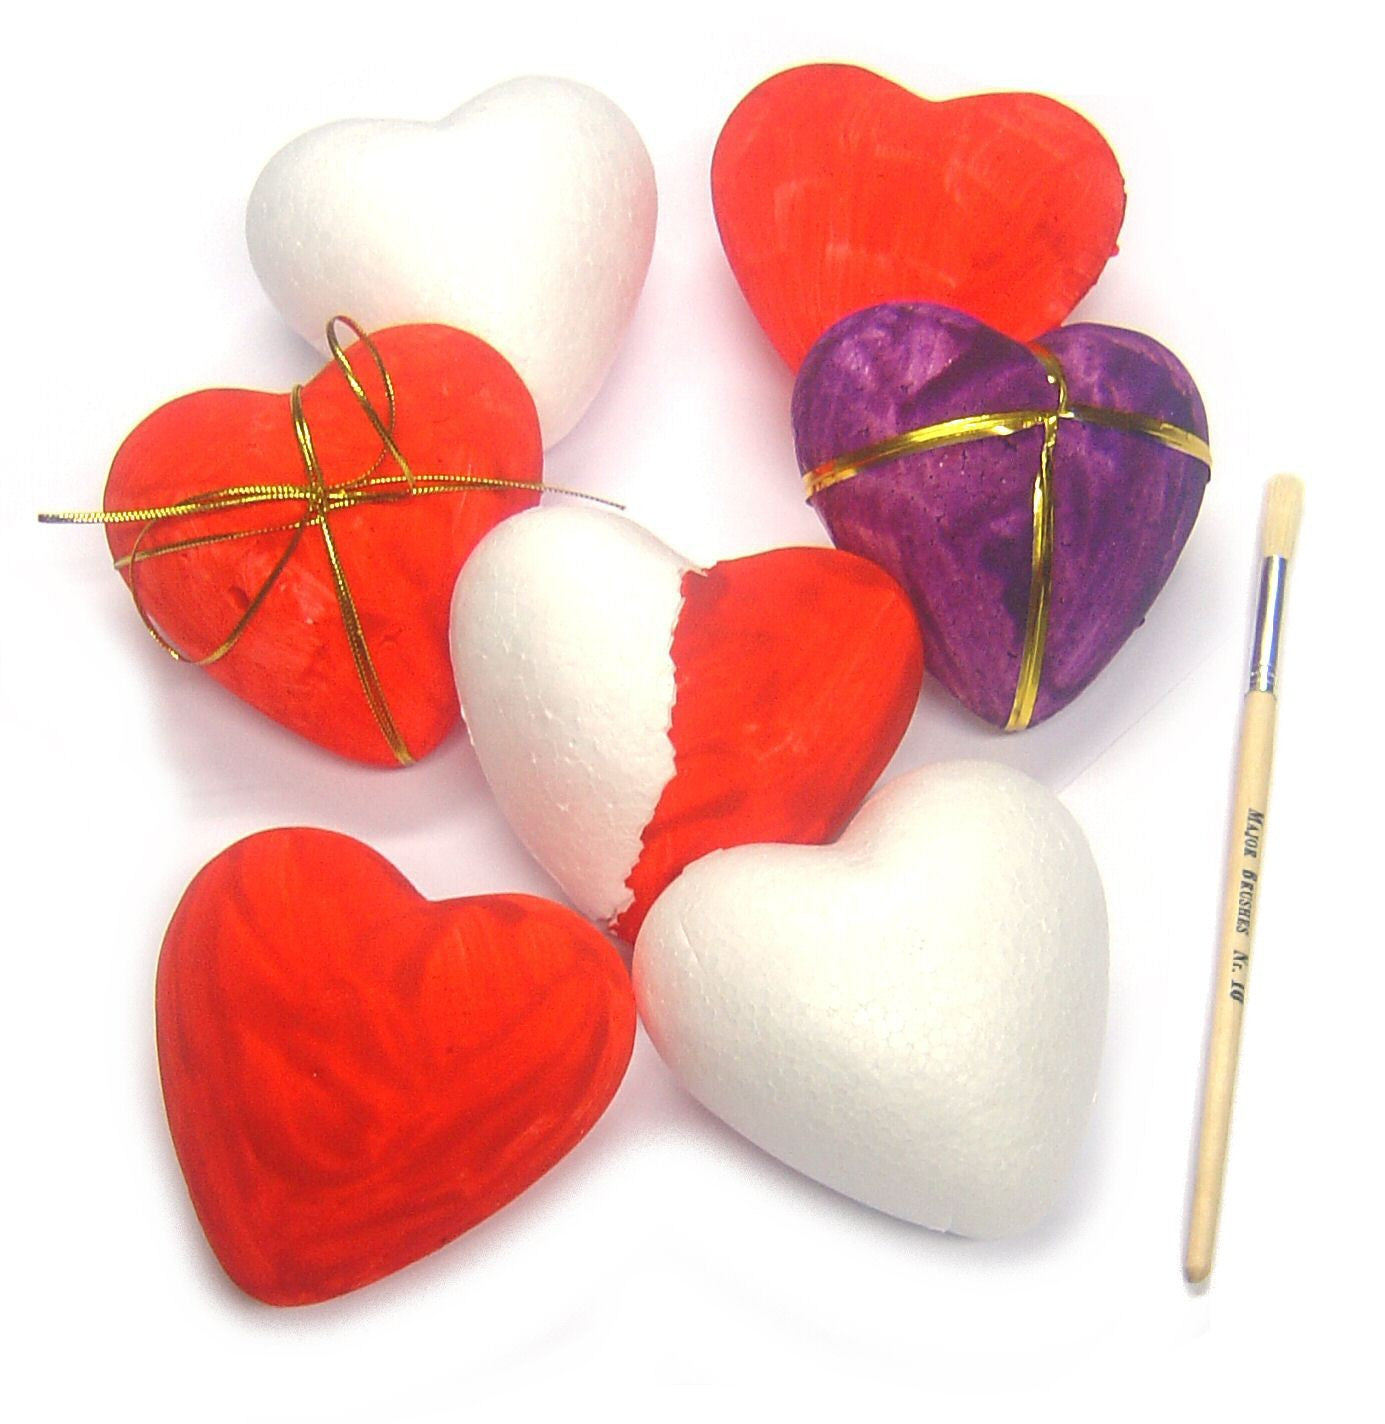 1pc White Diy Styrofoam Heart Ø15 Cm, / Polyester Shapes And Accessories,  Craft Supplies, Decorations for Sale and Wholesale